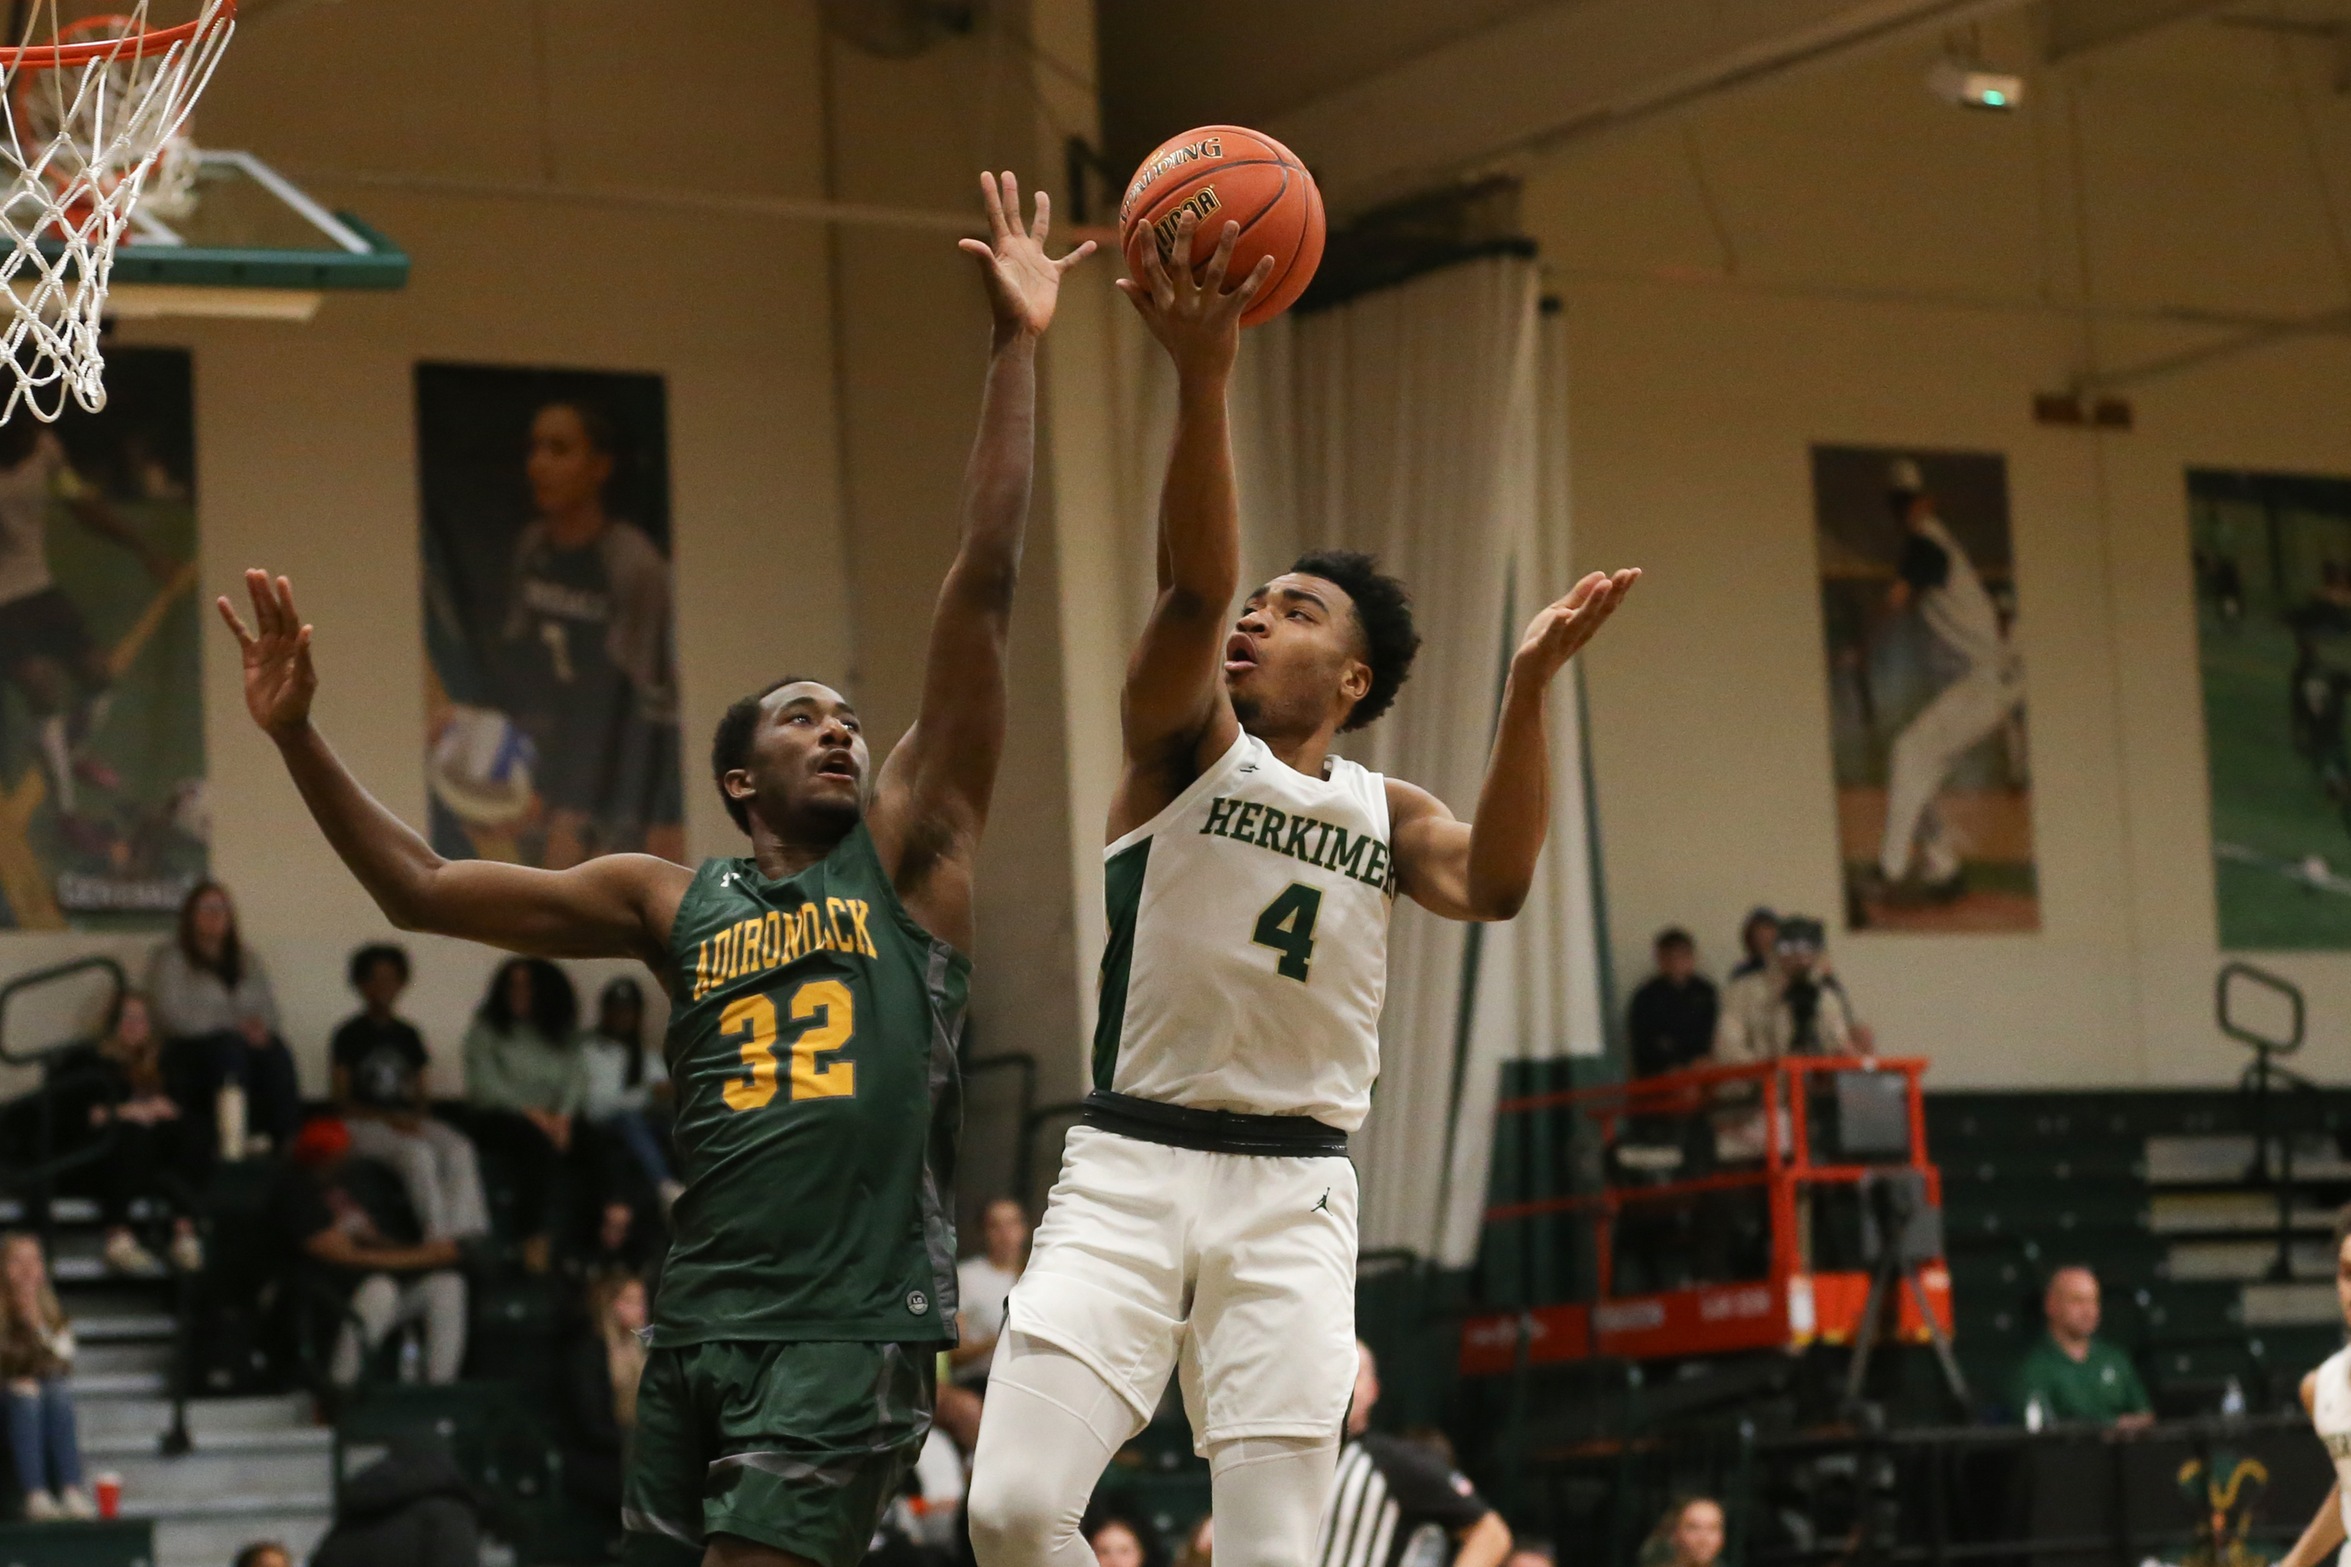 Harris's Five Three-Pointers Lifts Men's Basketball over Clinton